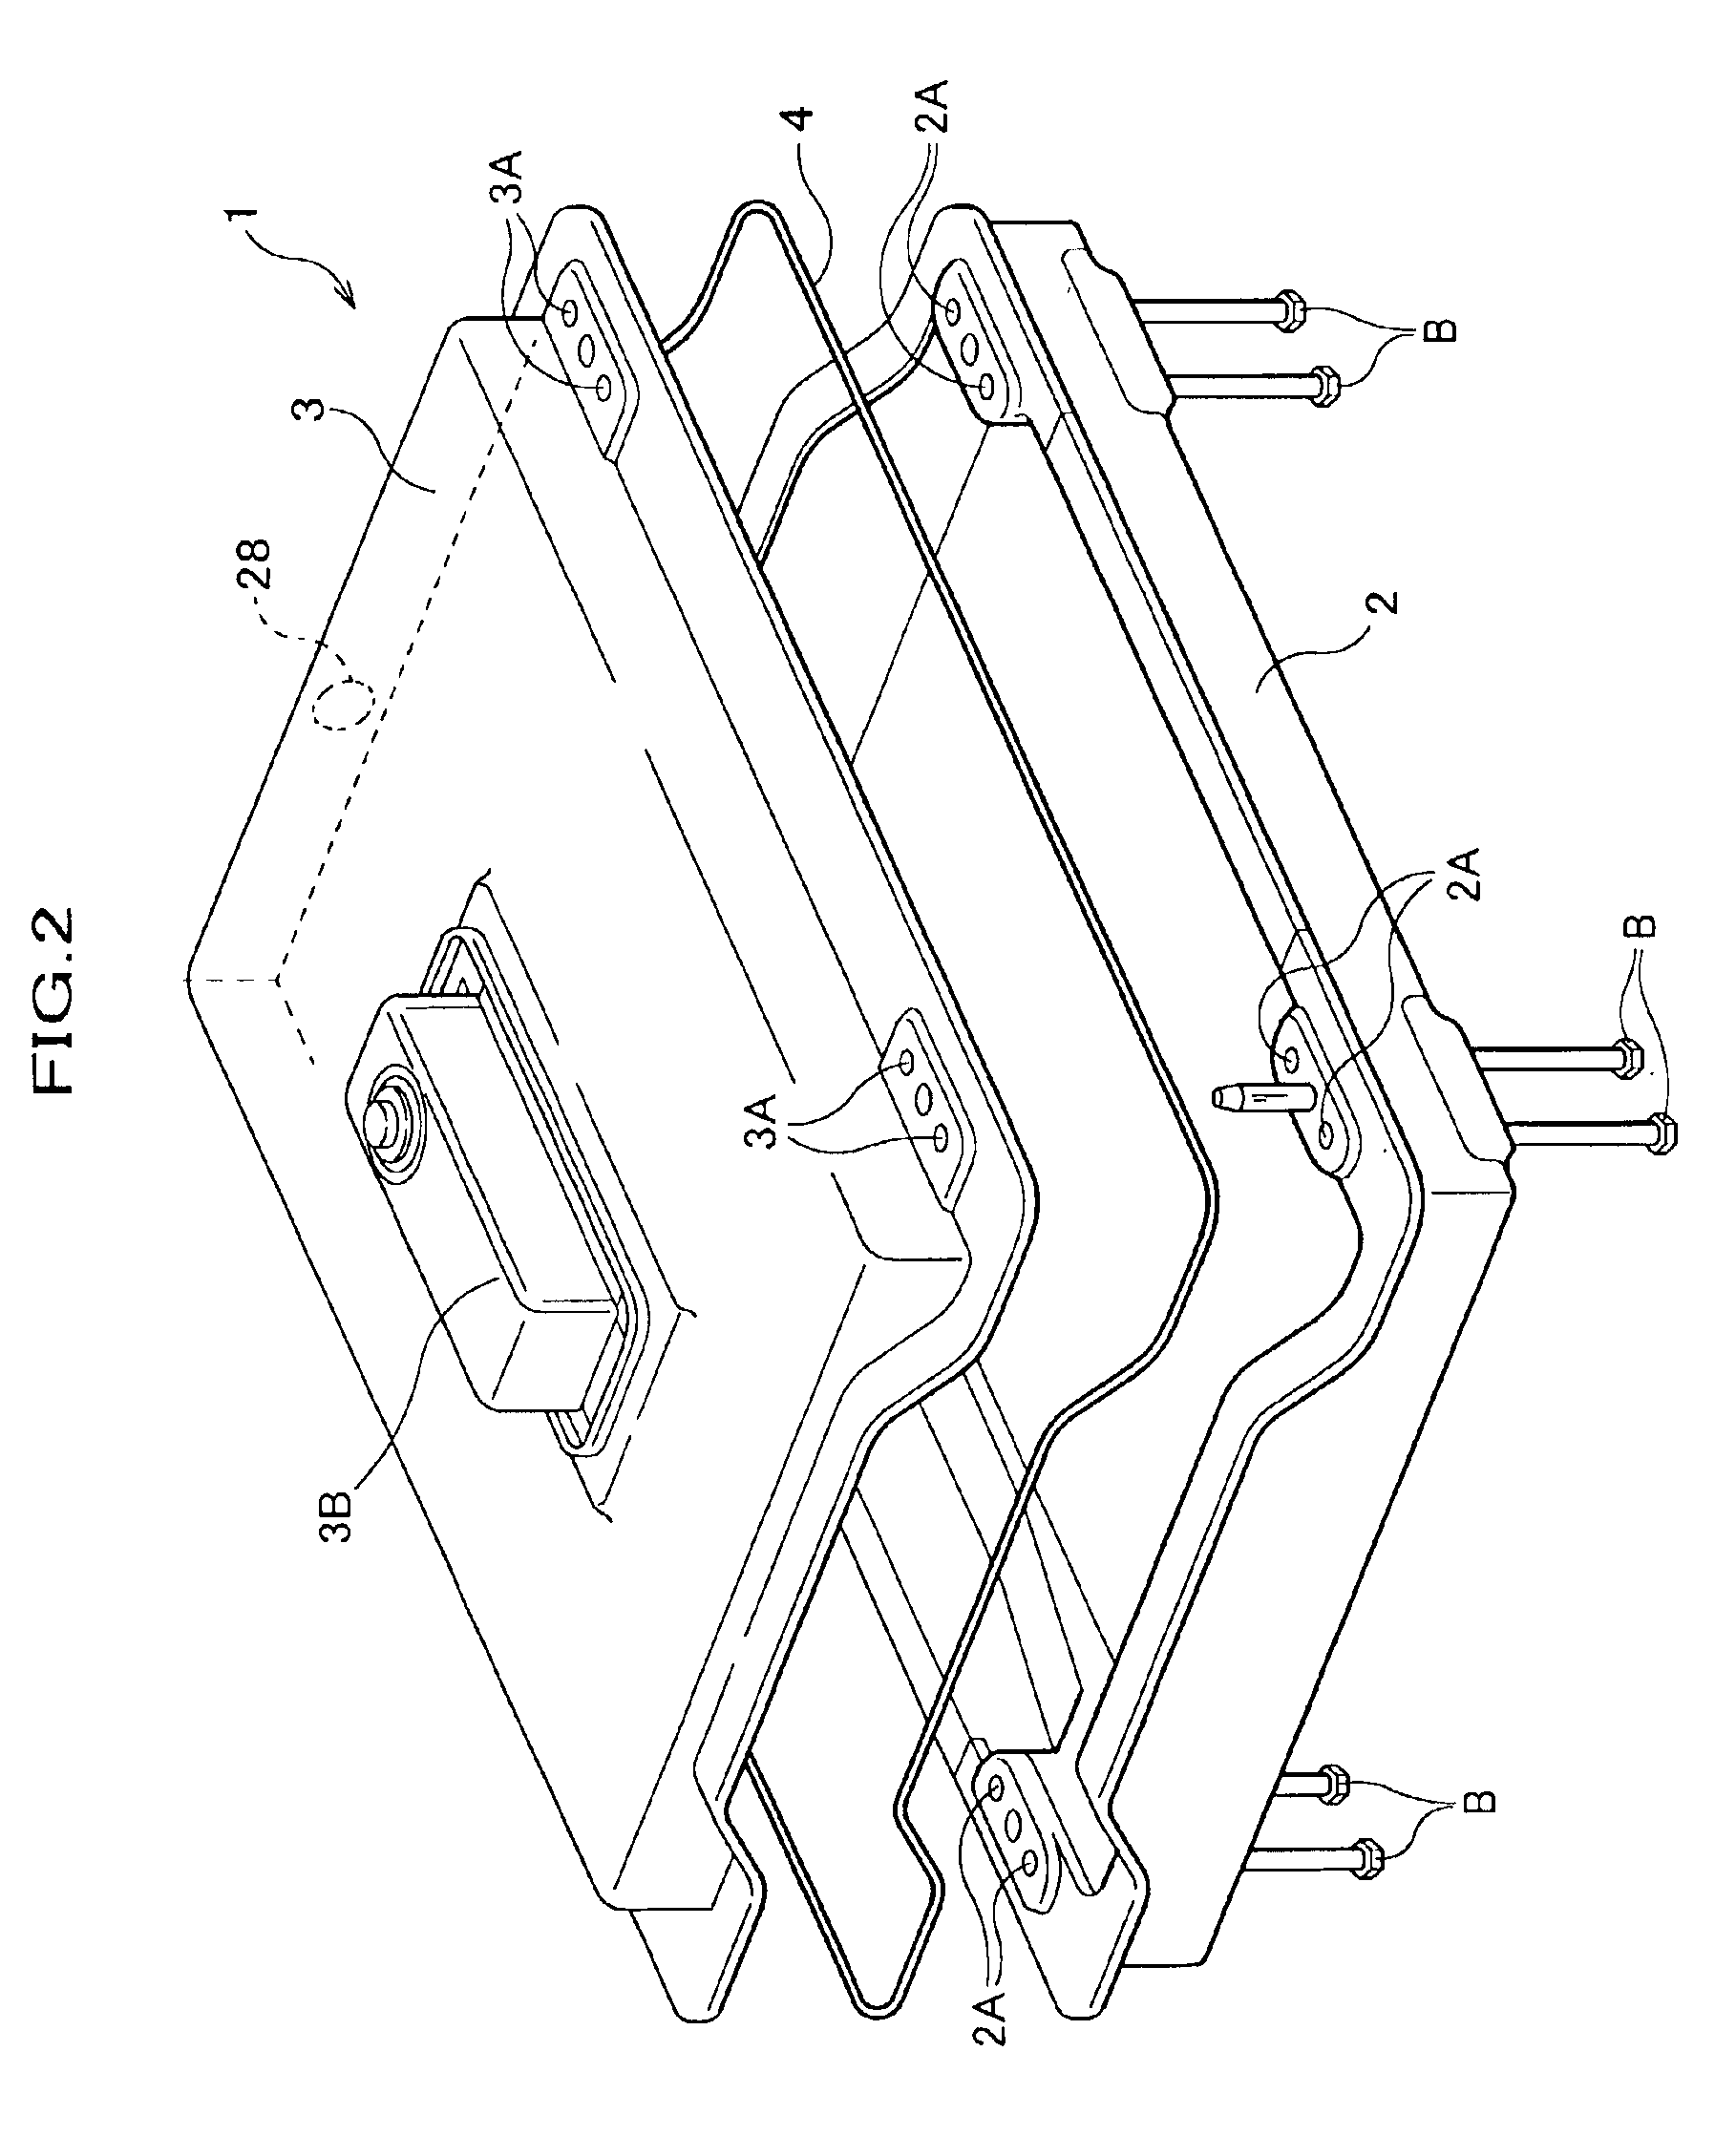 Fuel cell electric vehicle and a fuel cell system box